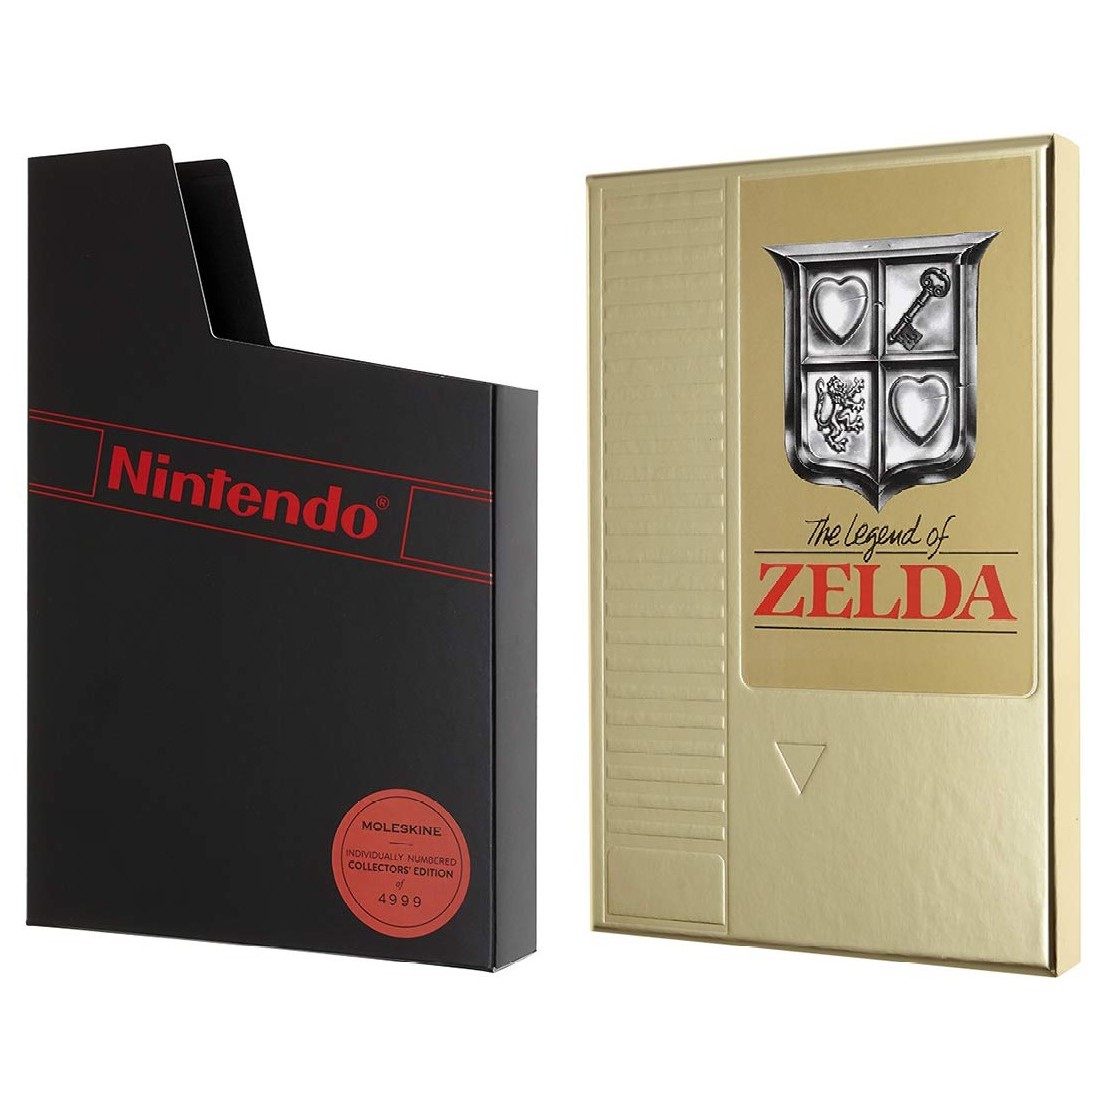 Limited Edition Ruled Notebook (Collector's Edition) by Moleskin, Italy 2020.